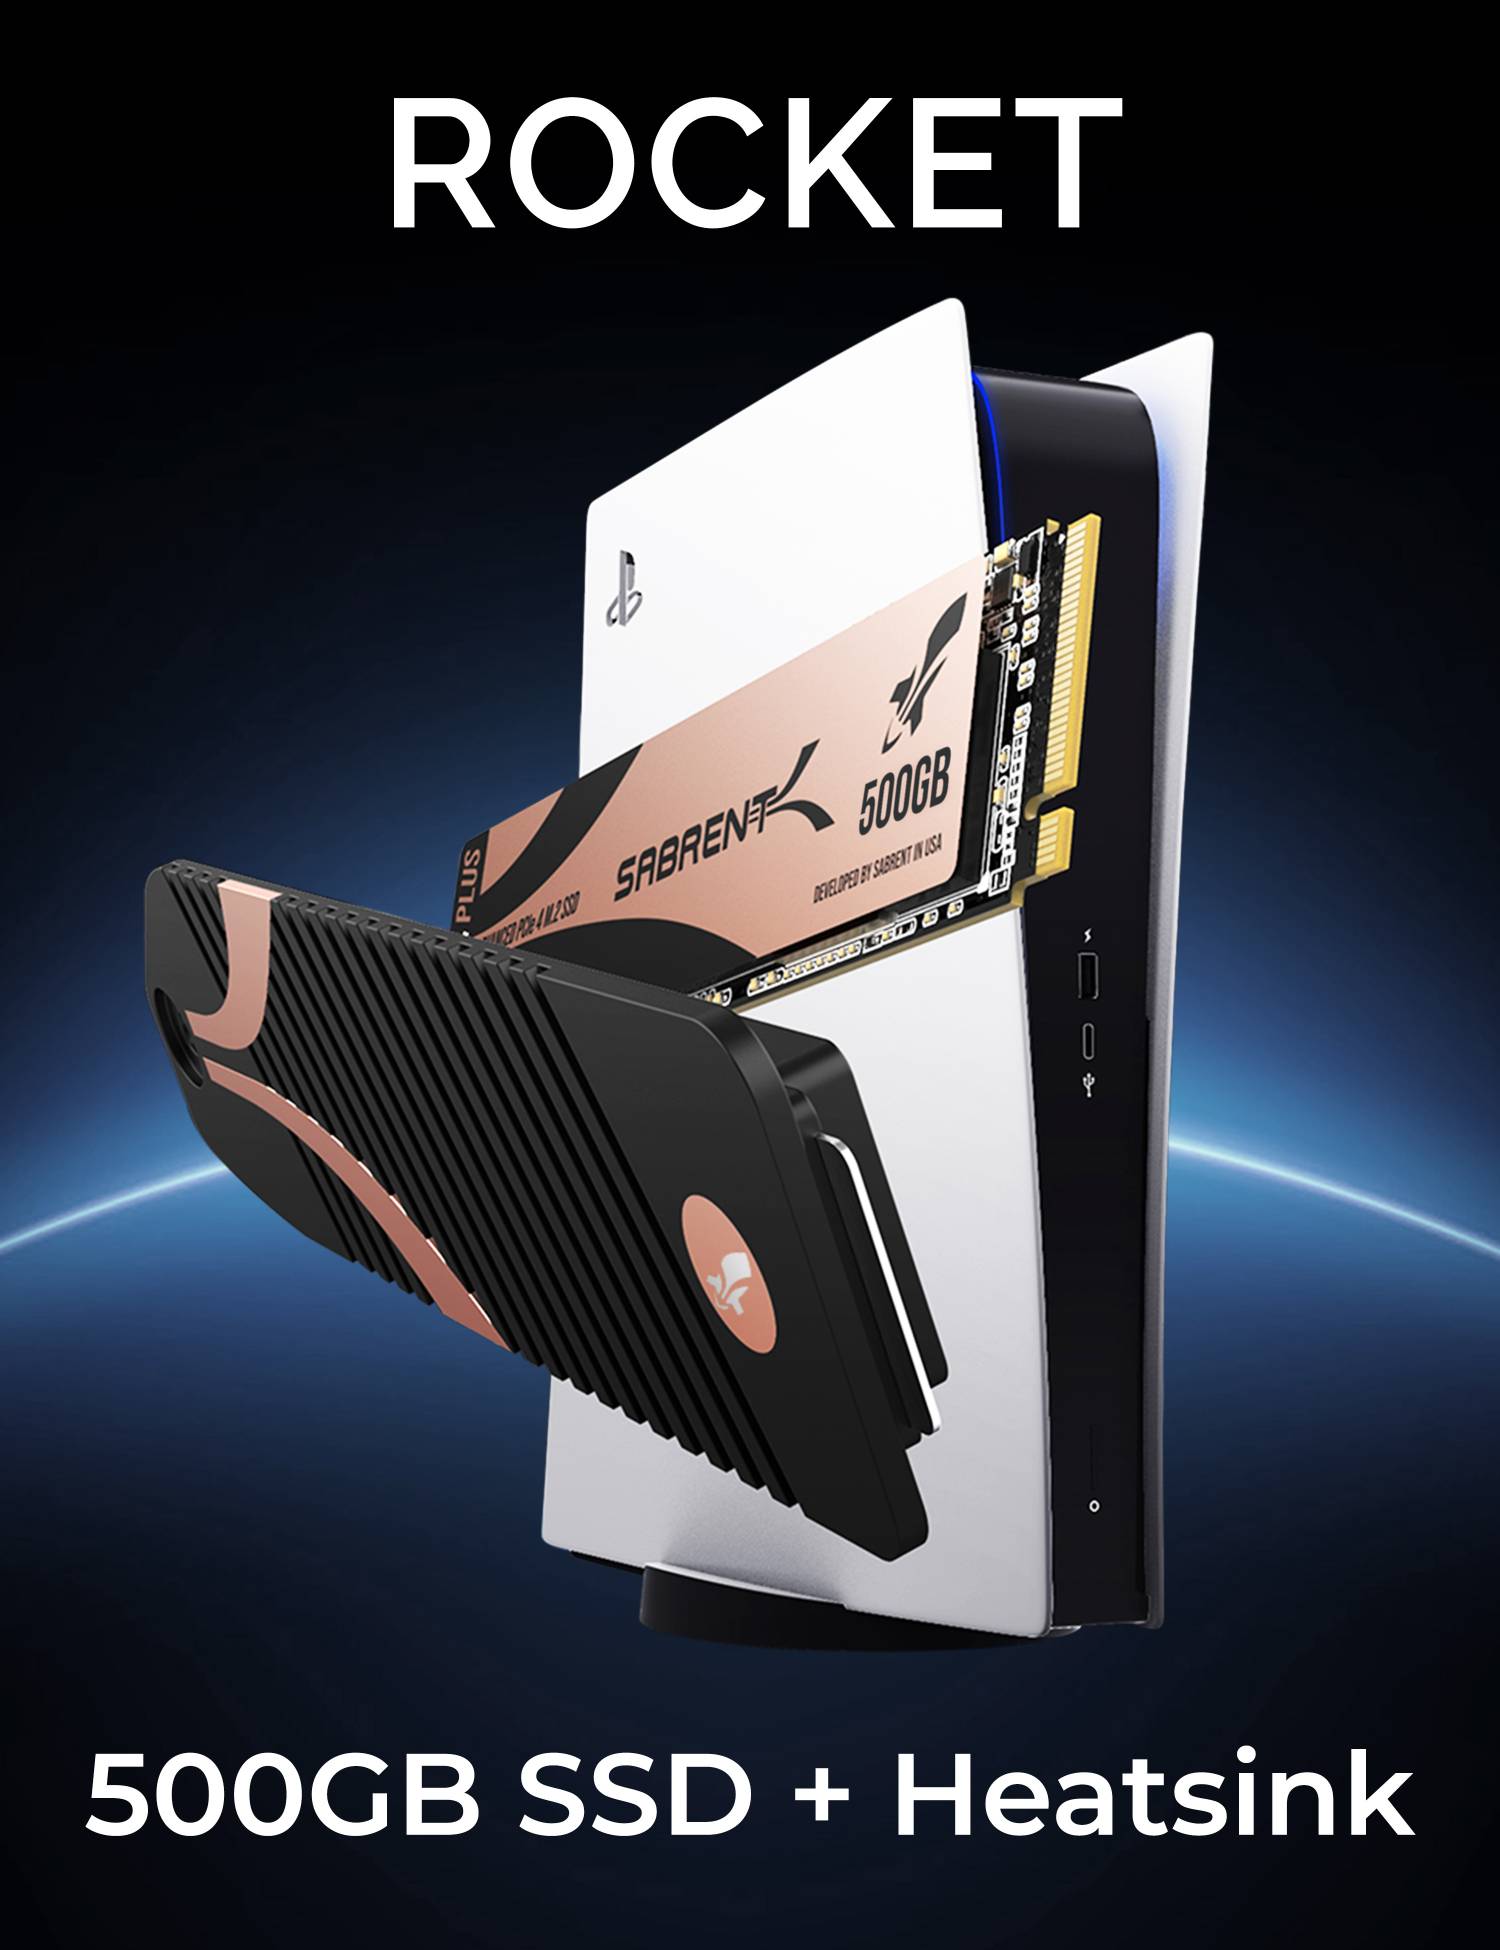 This 1TB PS5 SSD Includes a Heatsink for $90, and It's Never Been